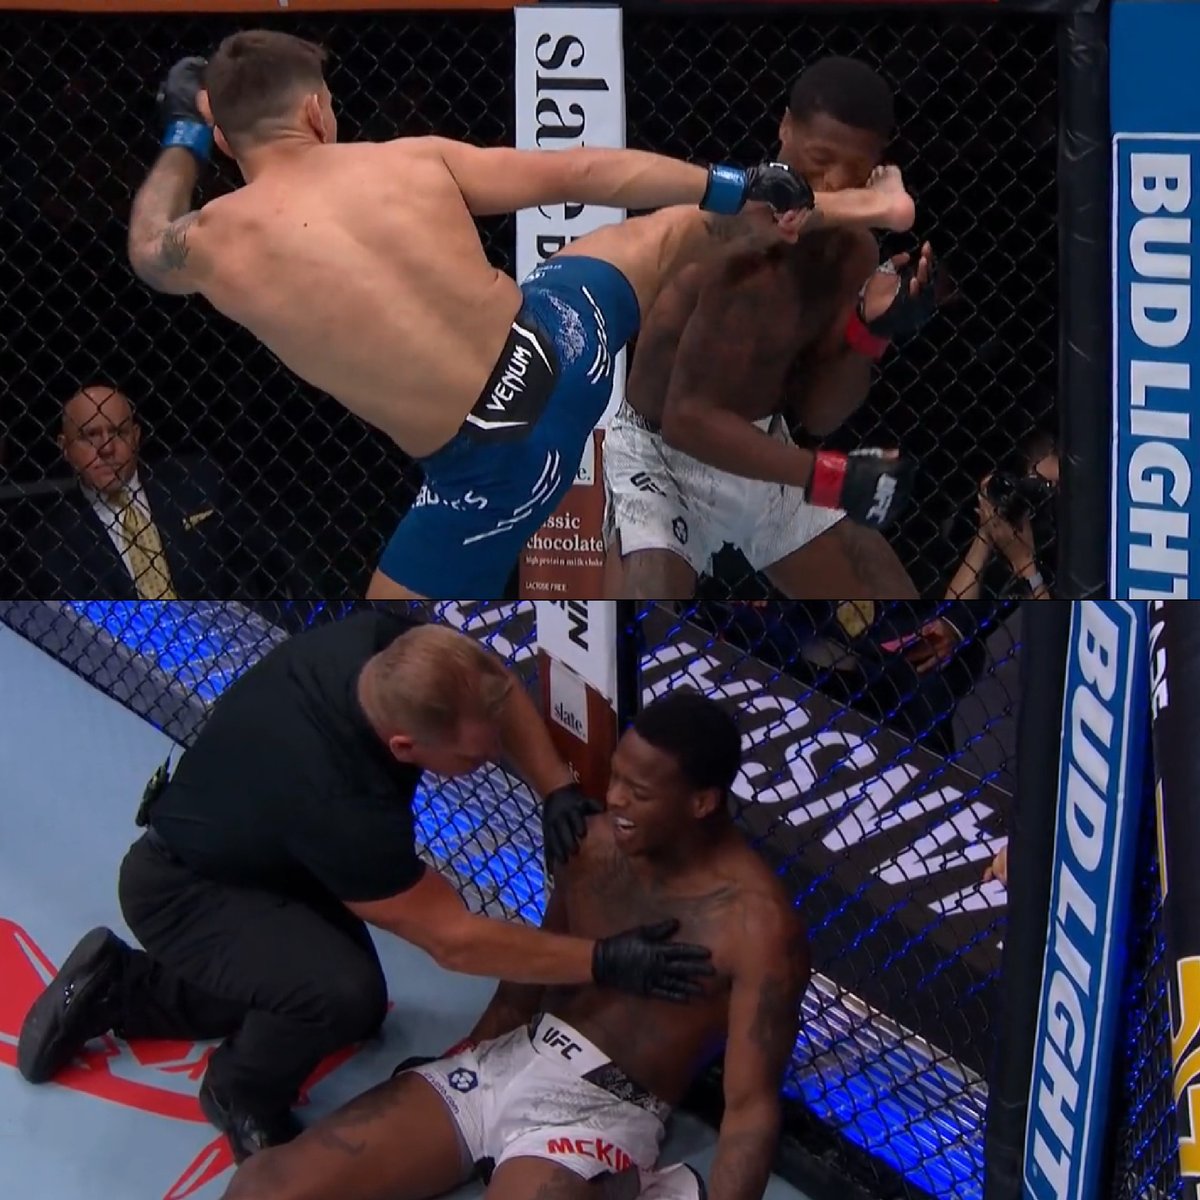 Esteban Ribovics knocks Terrance McKinney out COLD at #UFCStLouis with a perfect head kick inside one minute.